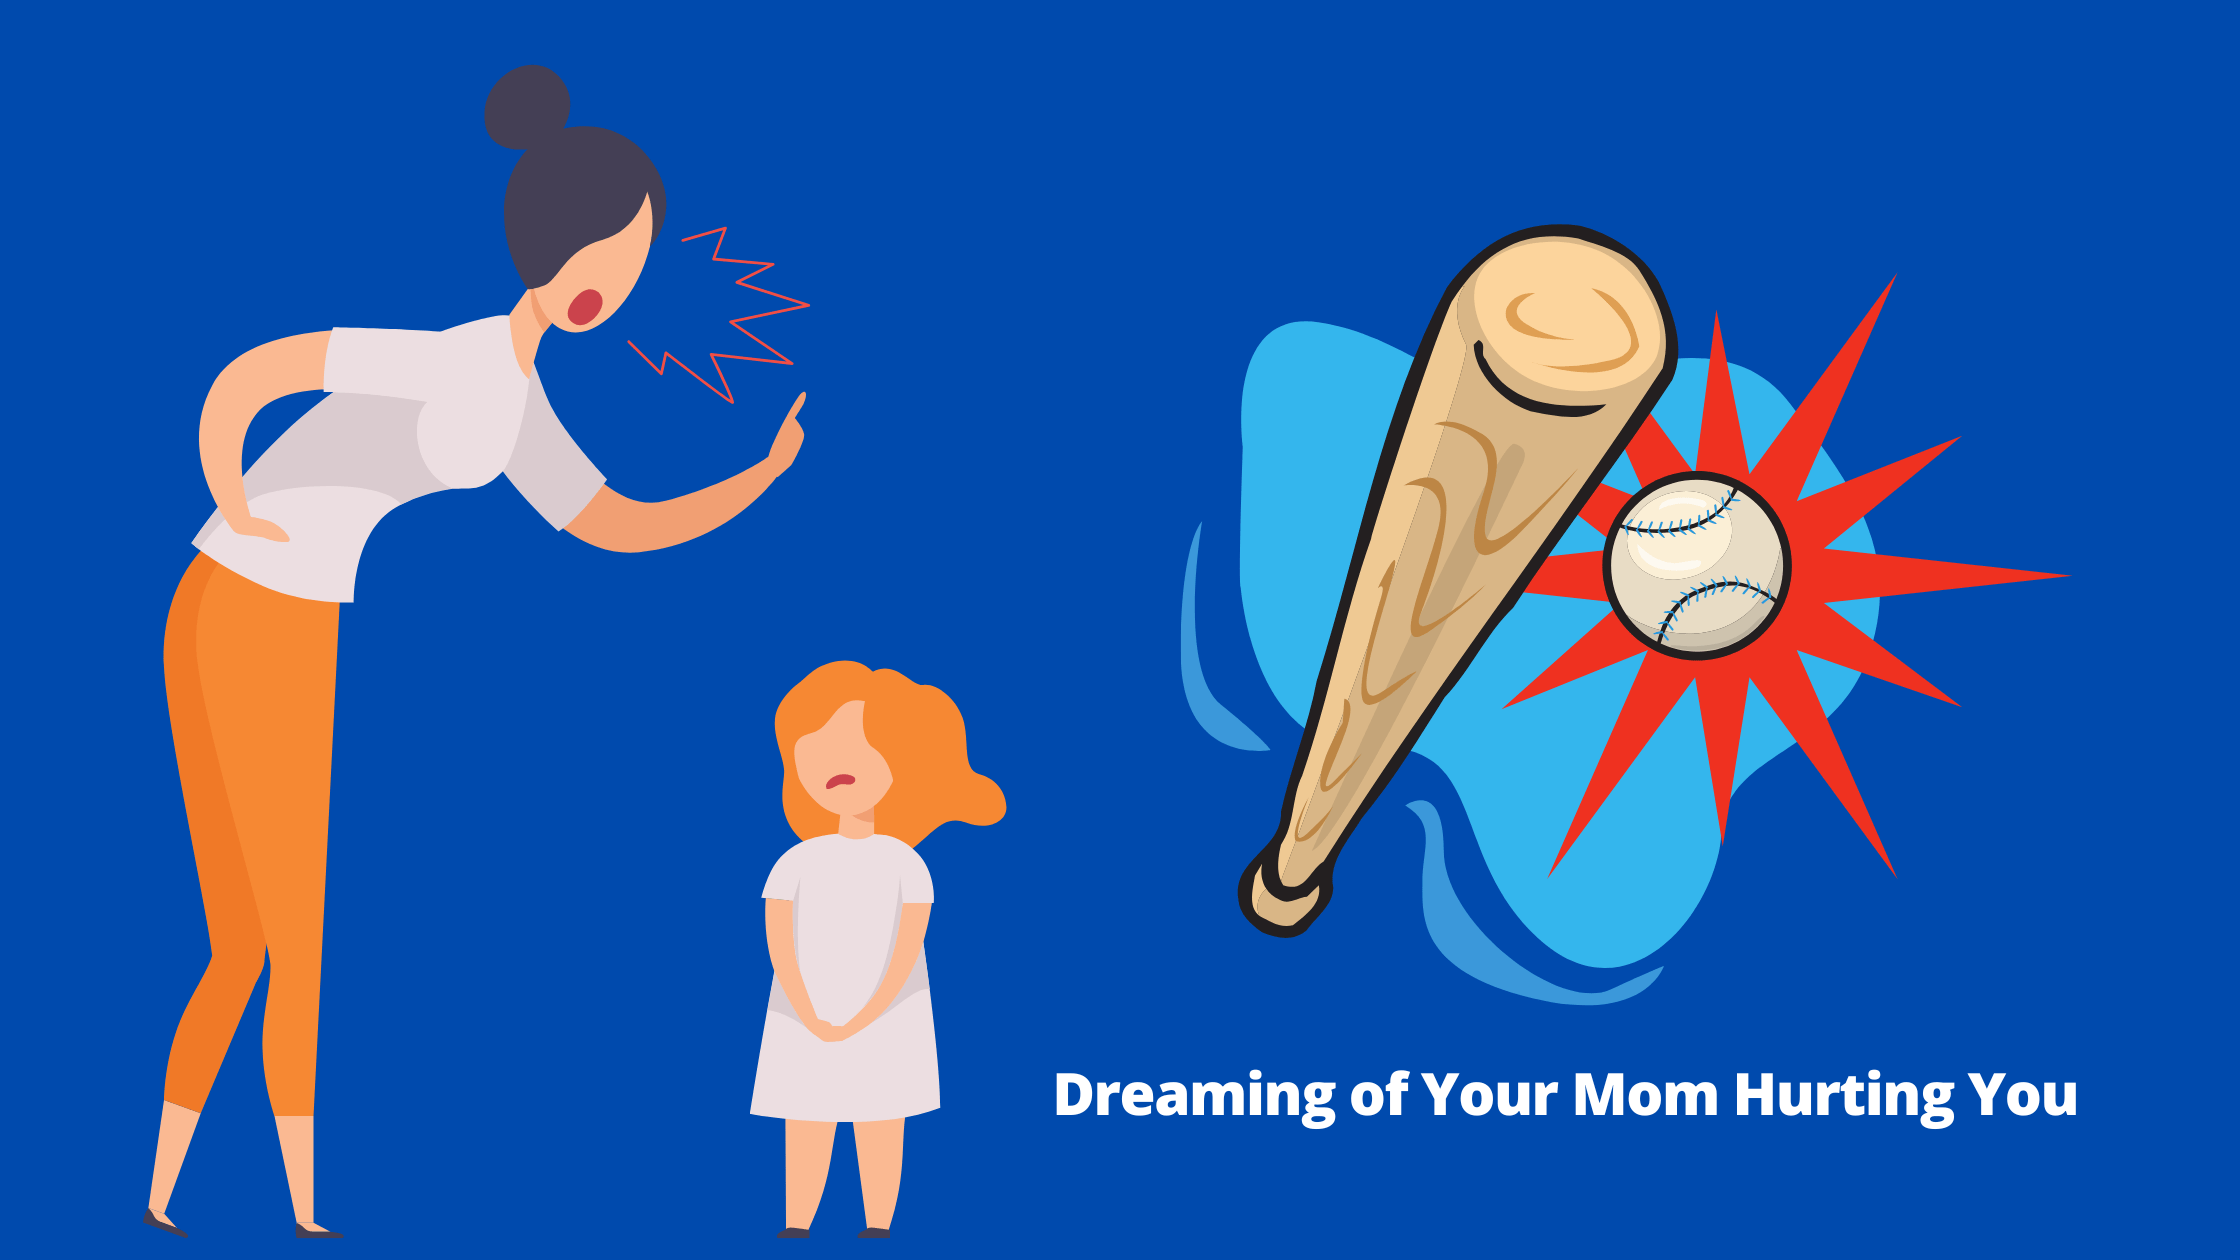 Dreaming of Your Mom Hurting You